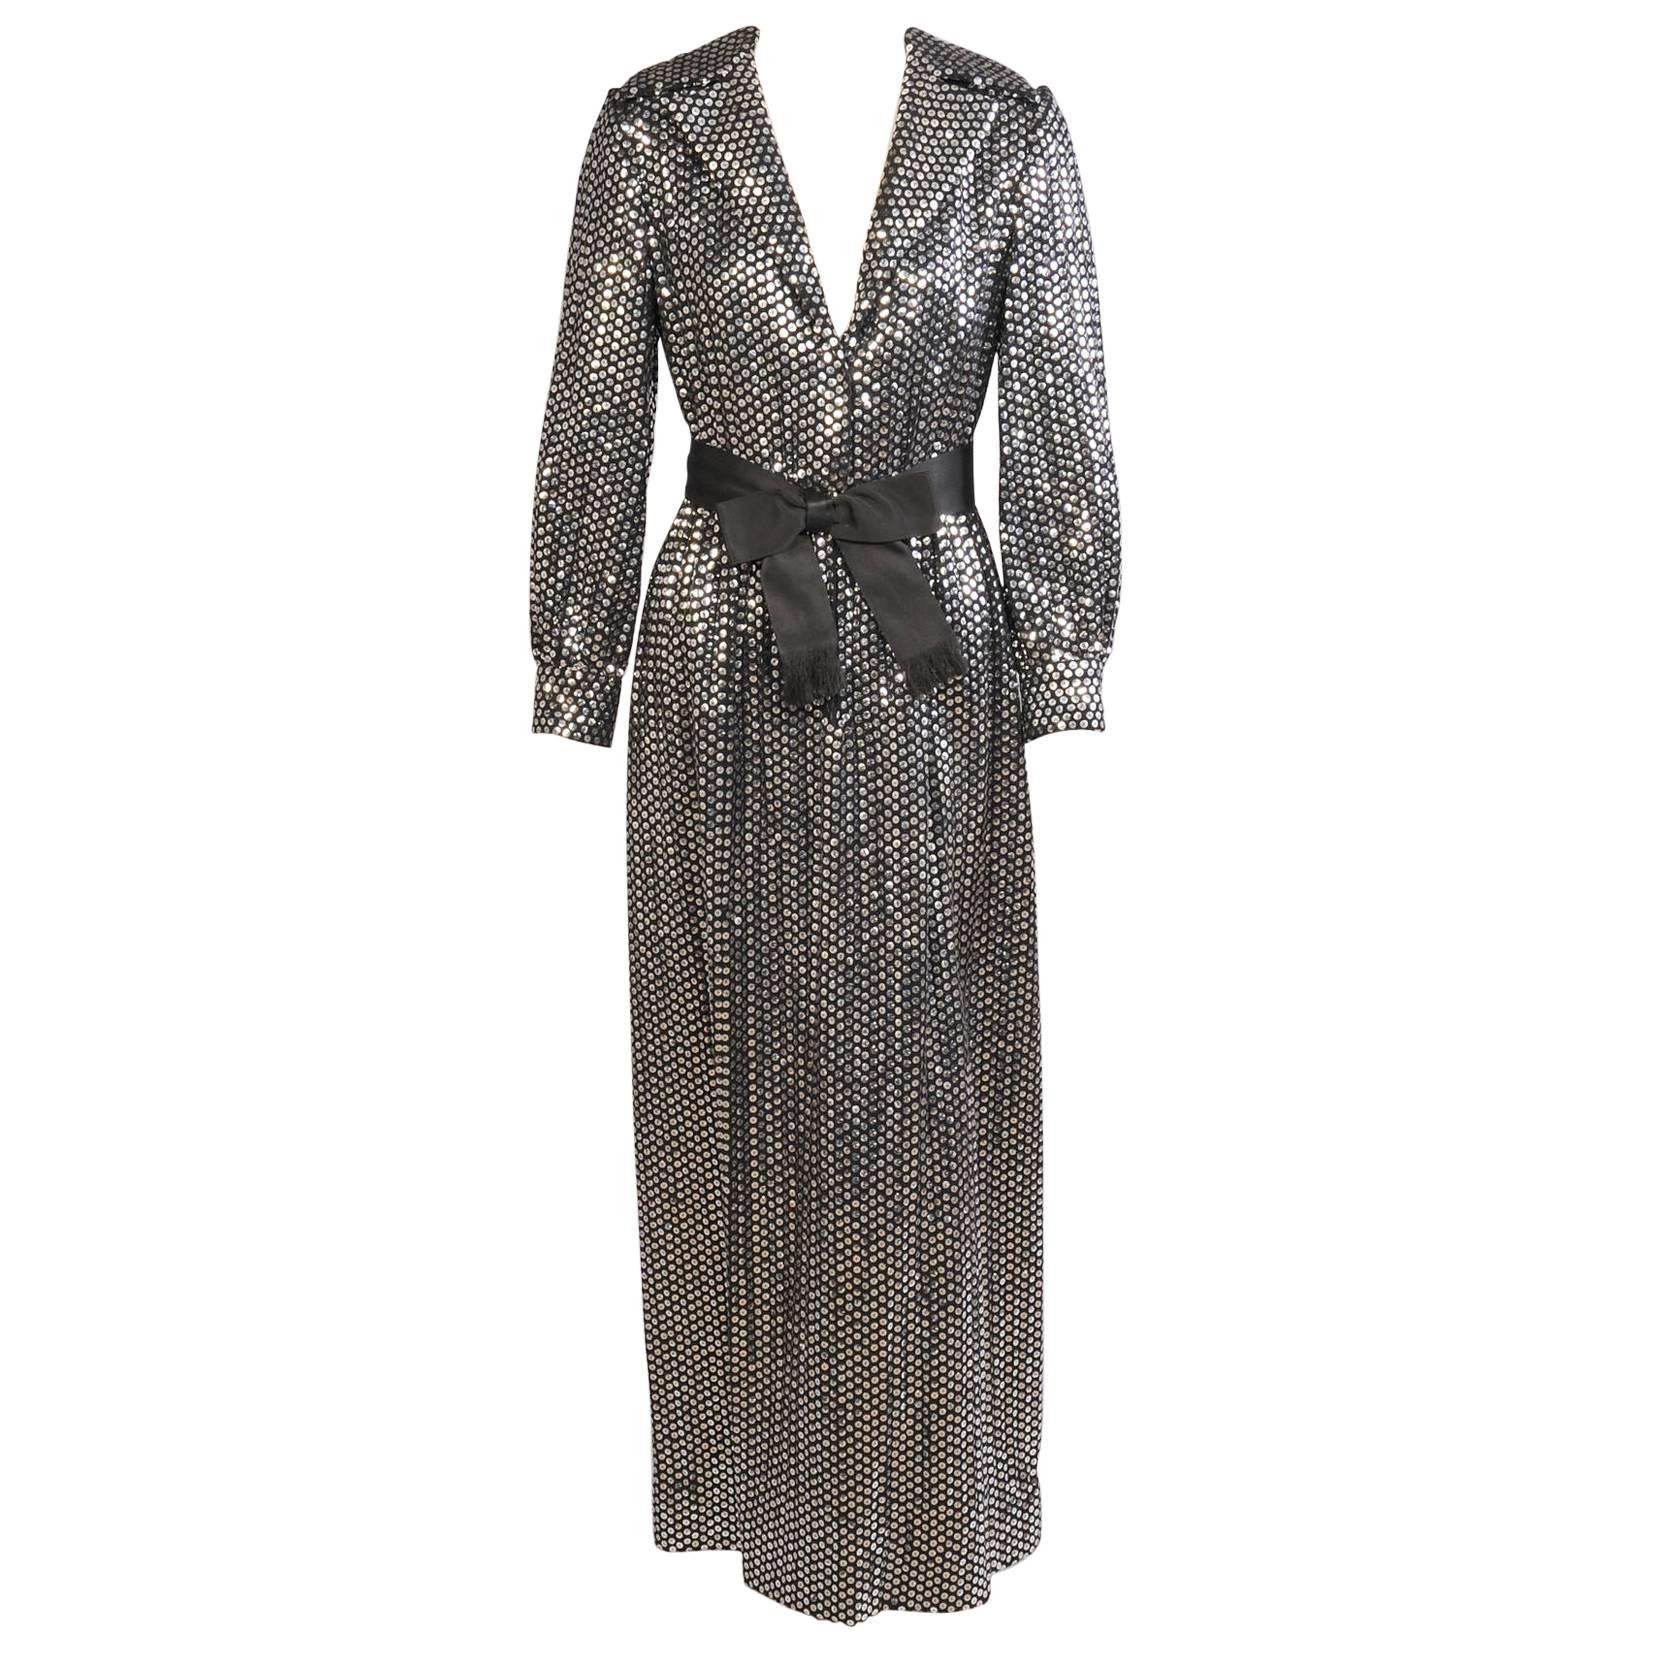 Miss Bergdorf Black Silk Evening Dress with Silver Sequins